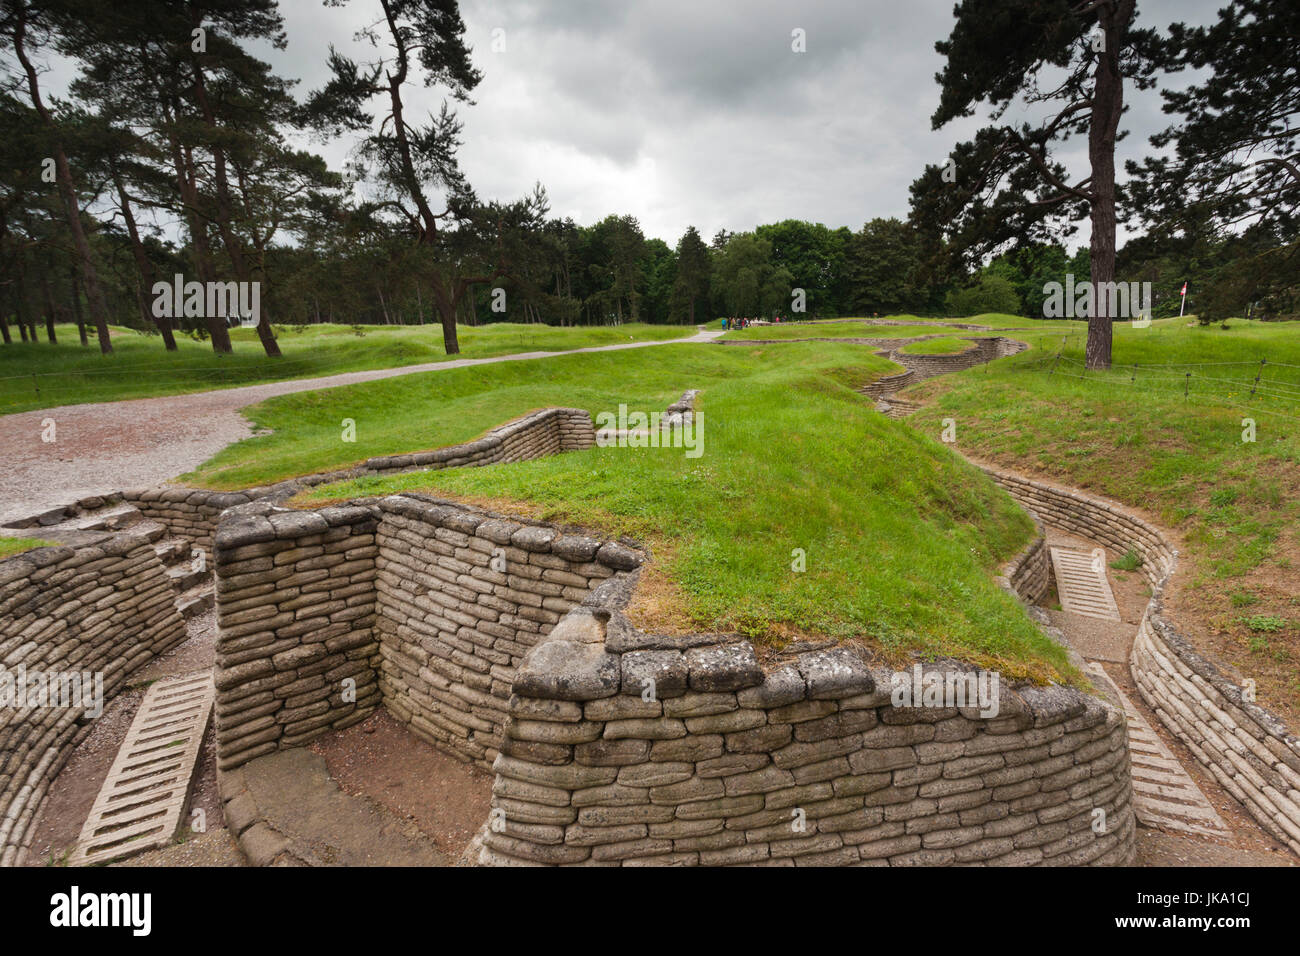 France, Nord-Pas de Calais Region, Pas de Calais Department, Vimy, Vimy Ridge National Historic Site of Canada, World War One battle site and memorial to Canadian troops, replica trenches Stock Photo